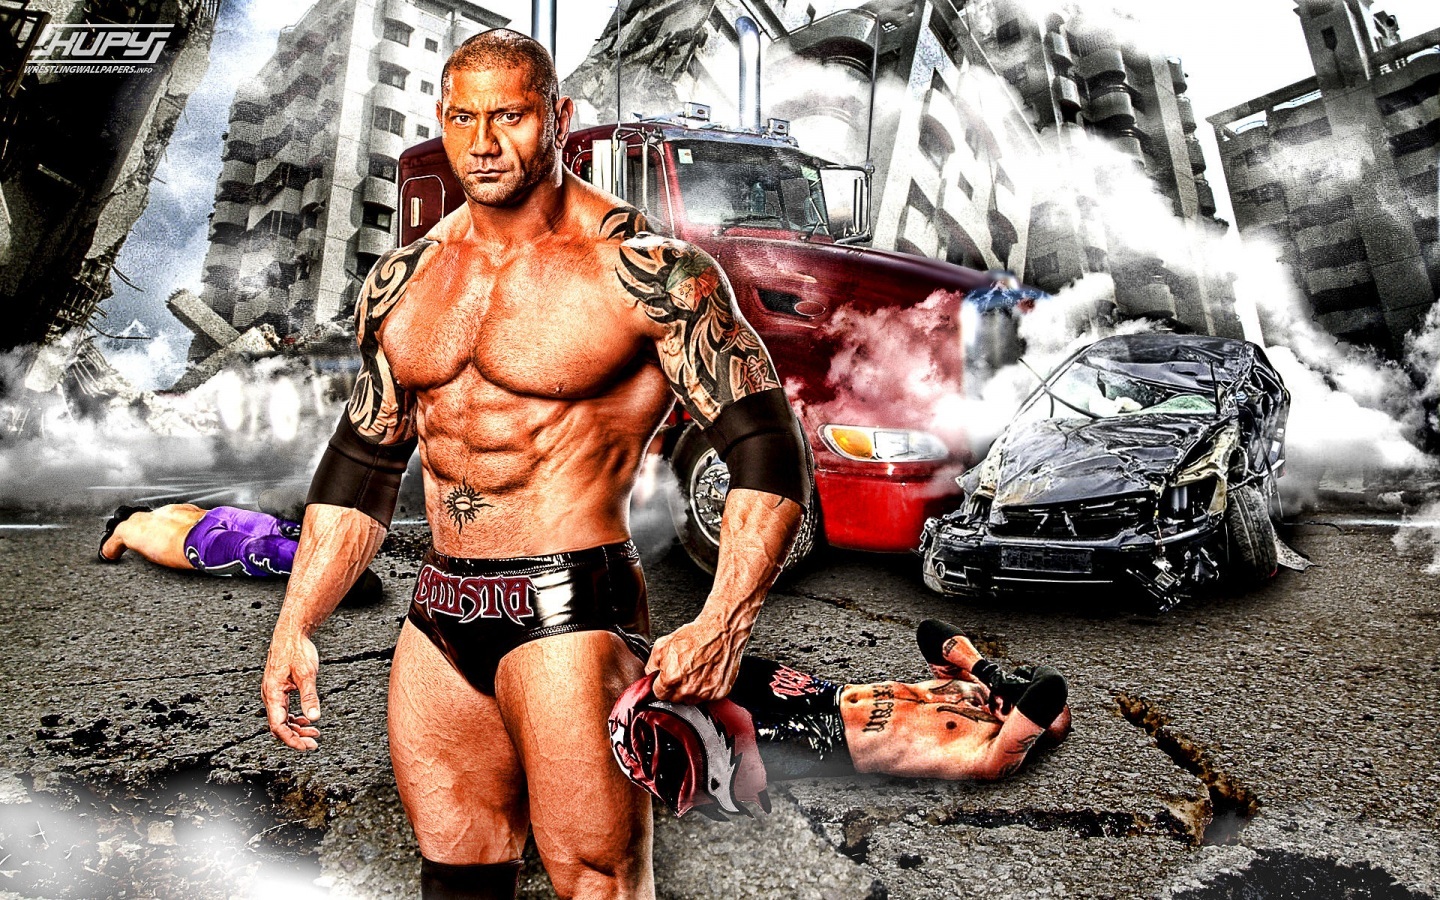 Wwe Batista Wallpaper Cast Photo Shared By Celle Fans Share Image